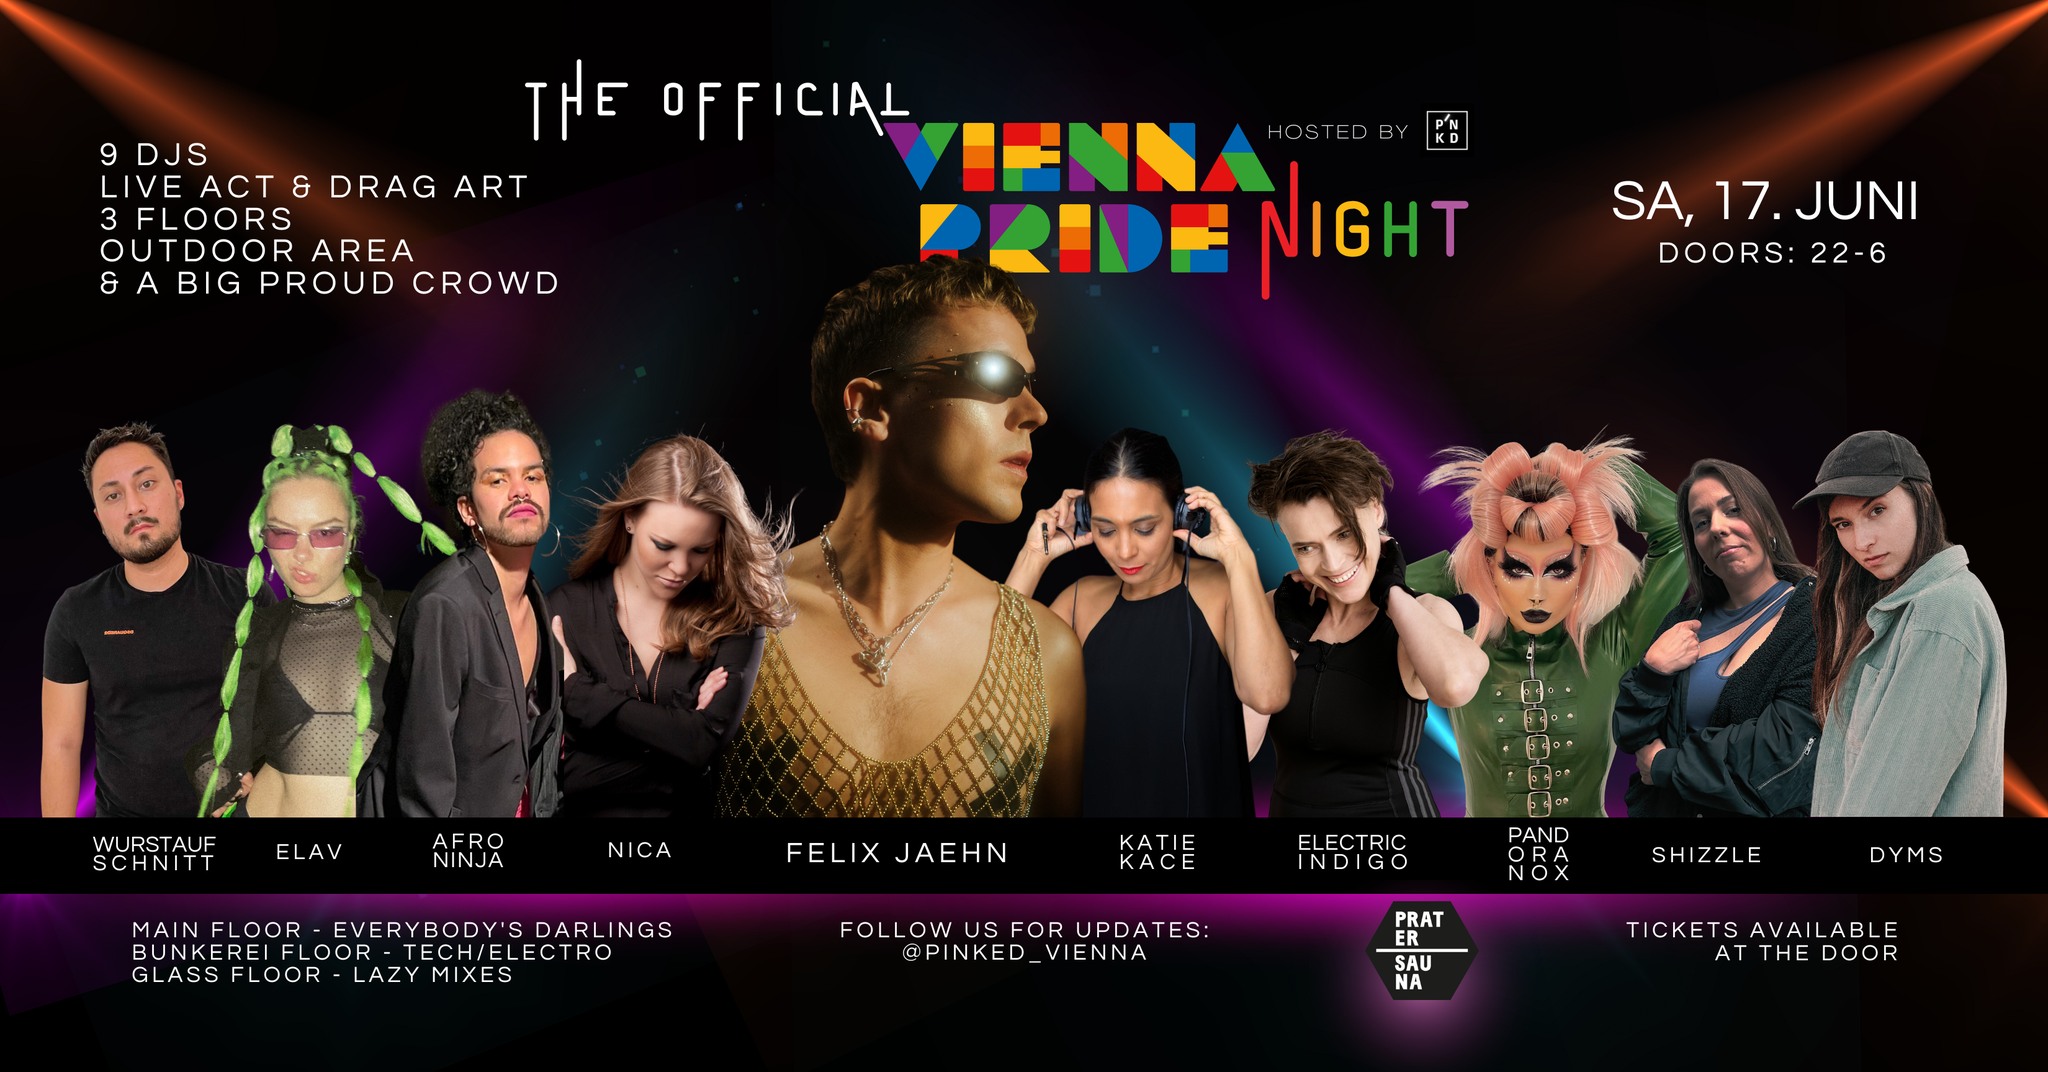 The Official Vienna Pride Night hosted by PiNKED am 17. June 2023 @ Pratersauna.